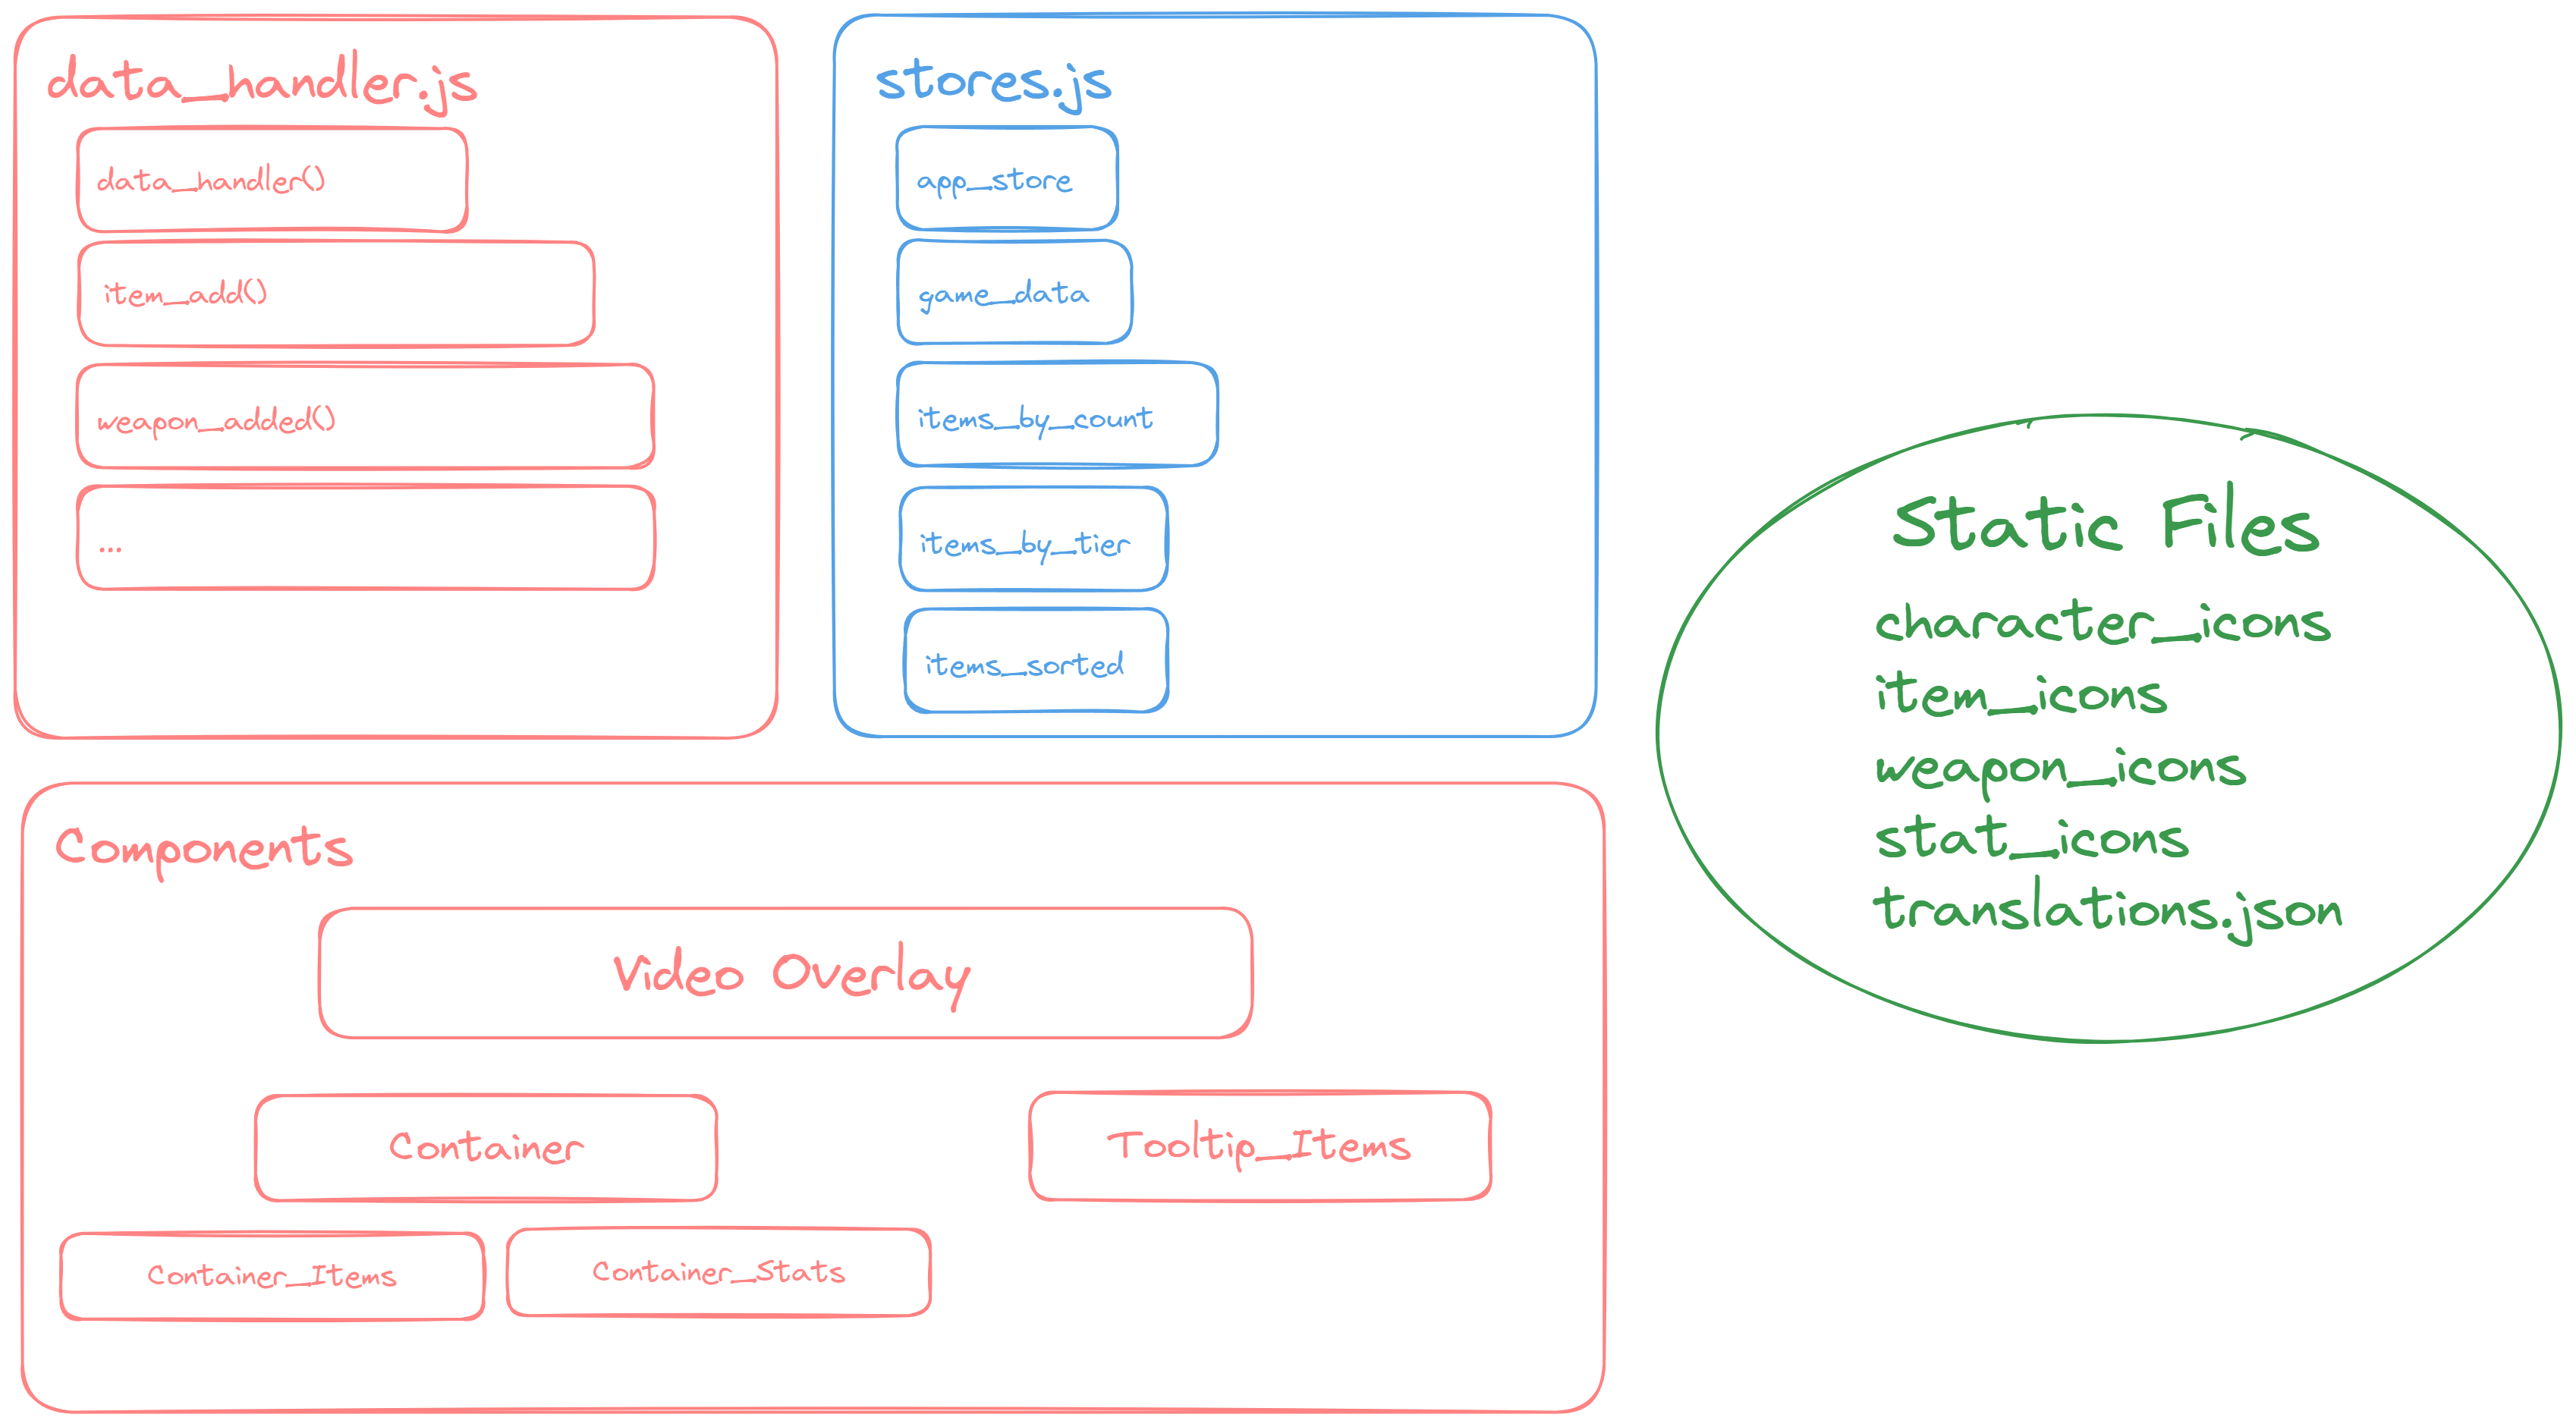 Diagram of the frontend structure. Showing data_handler.js with data handler methods for each action. stores.js with Svelte stores for general app data, game_data, and some derived stores for sorting items. Then a separate bubble for static files for all vanilla icons and the translation JSON file. Then the basic components with Video Overlay on the top, then Container, Container_Items, and Container_Stats underneath to the left. On the right, the Tooltip_Items component.